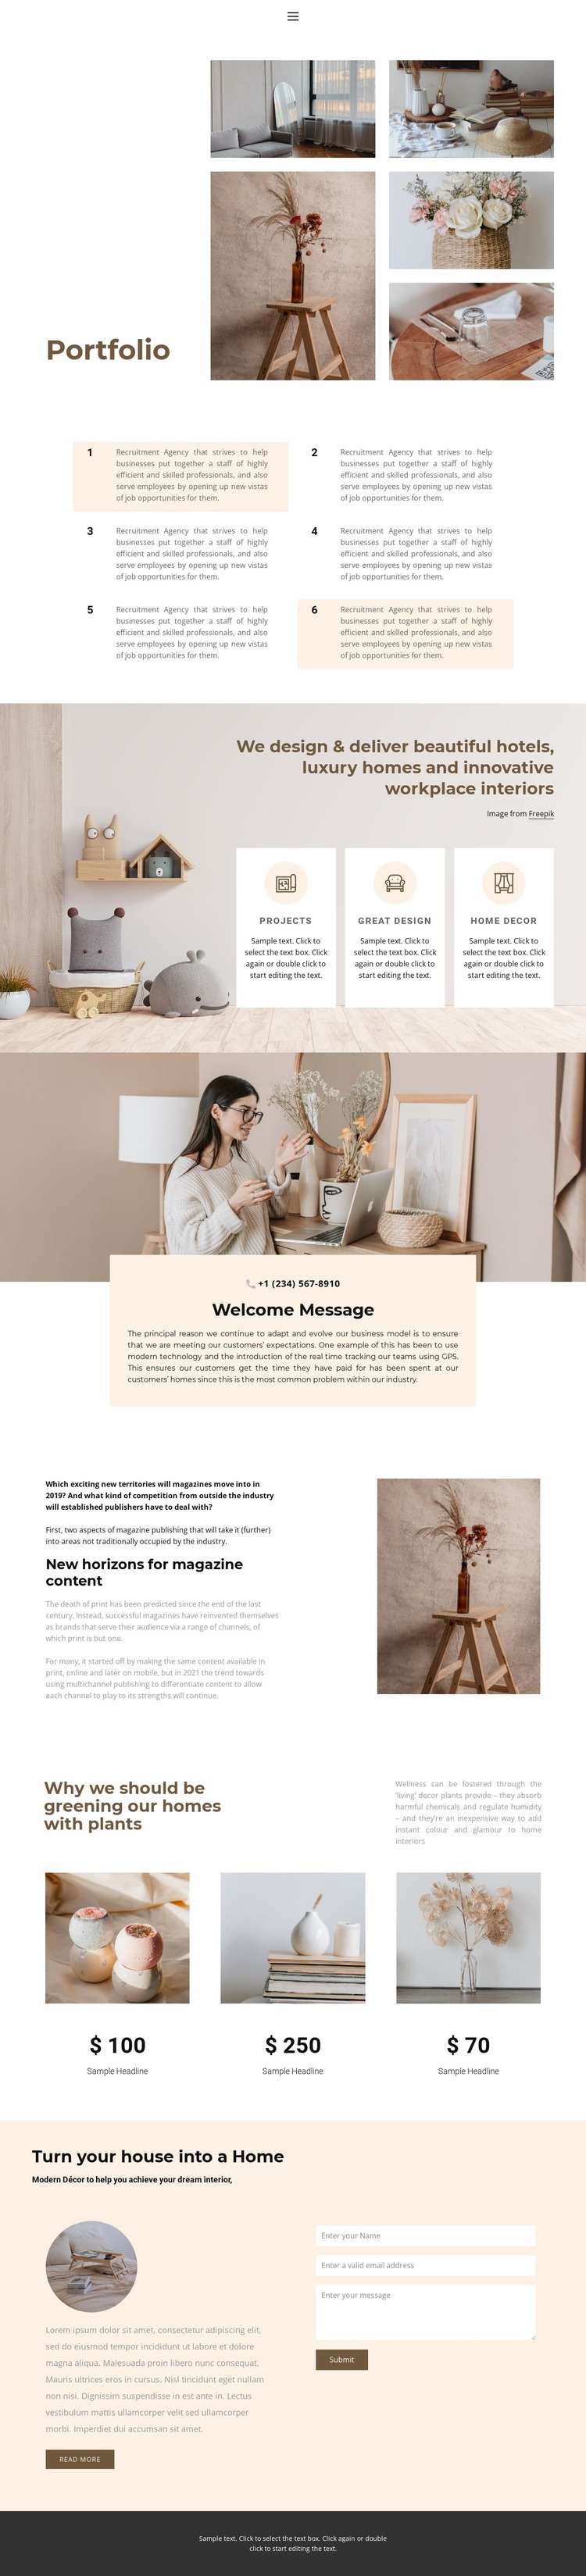 Decorate your home Website Mockup